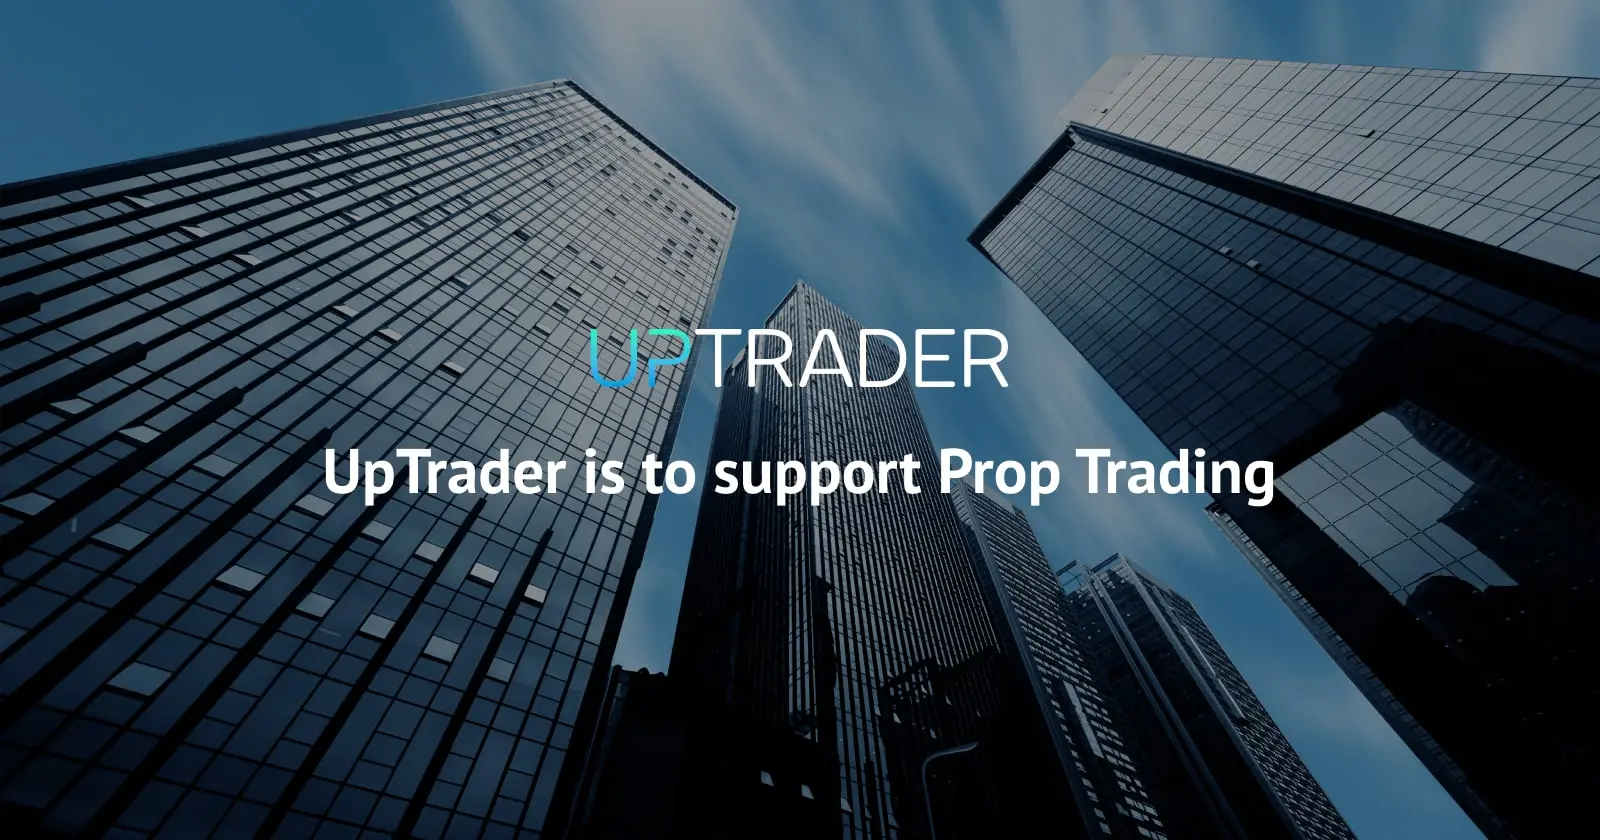 UpTrader is to support Prop Trading